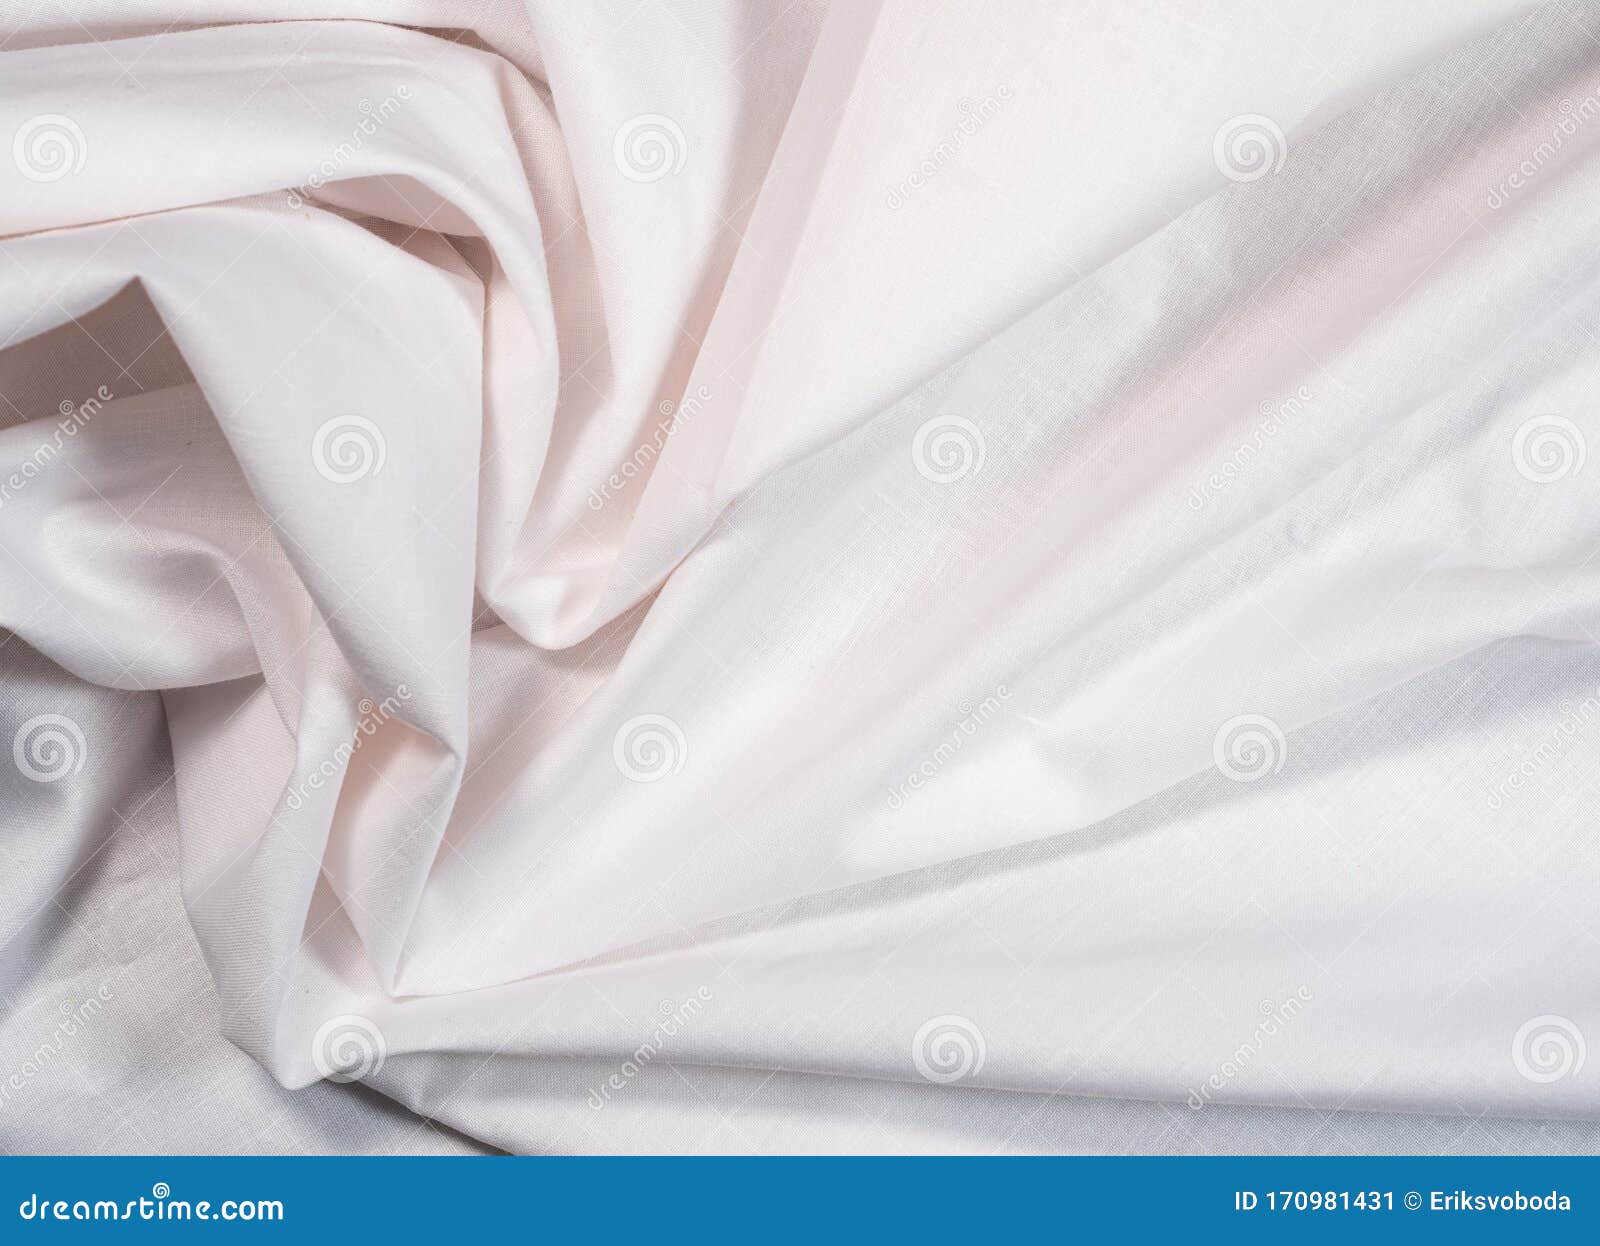 Crumpled White Sheet, Close Up View. White Textile, An Abstract Background. Texture Of Crumpled